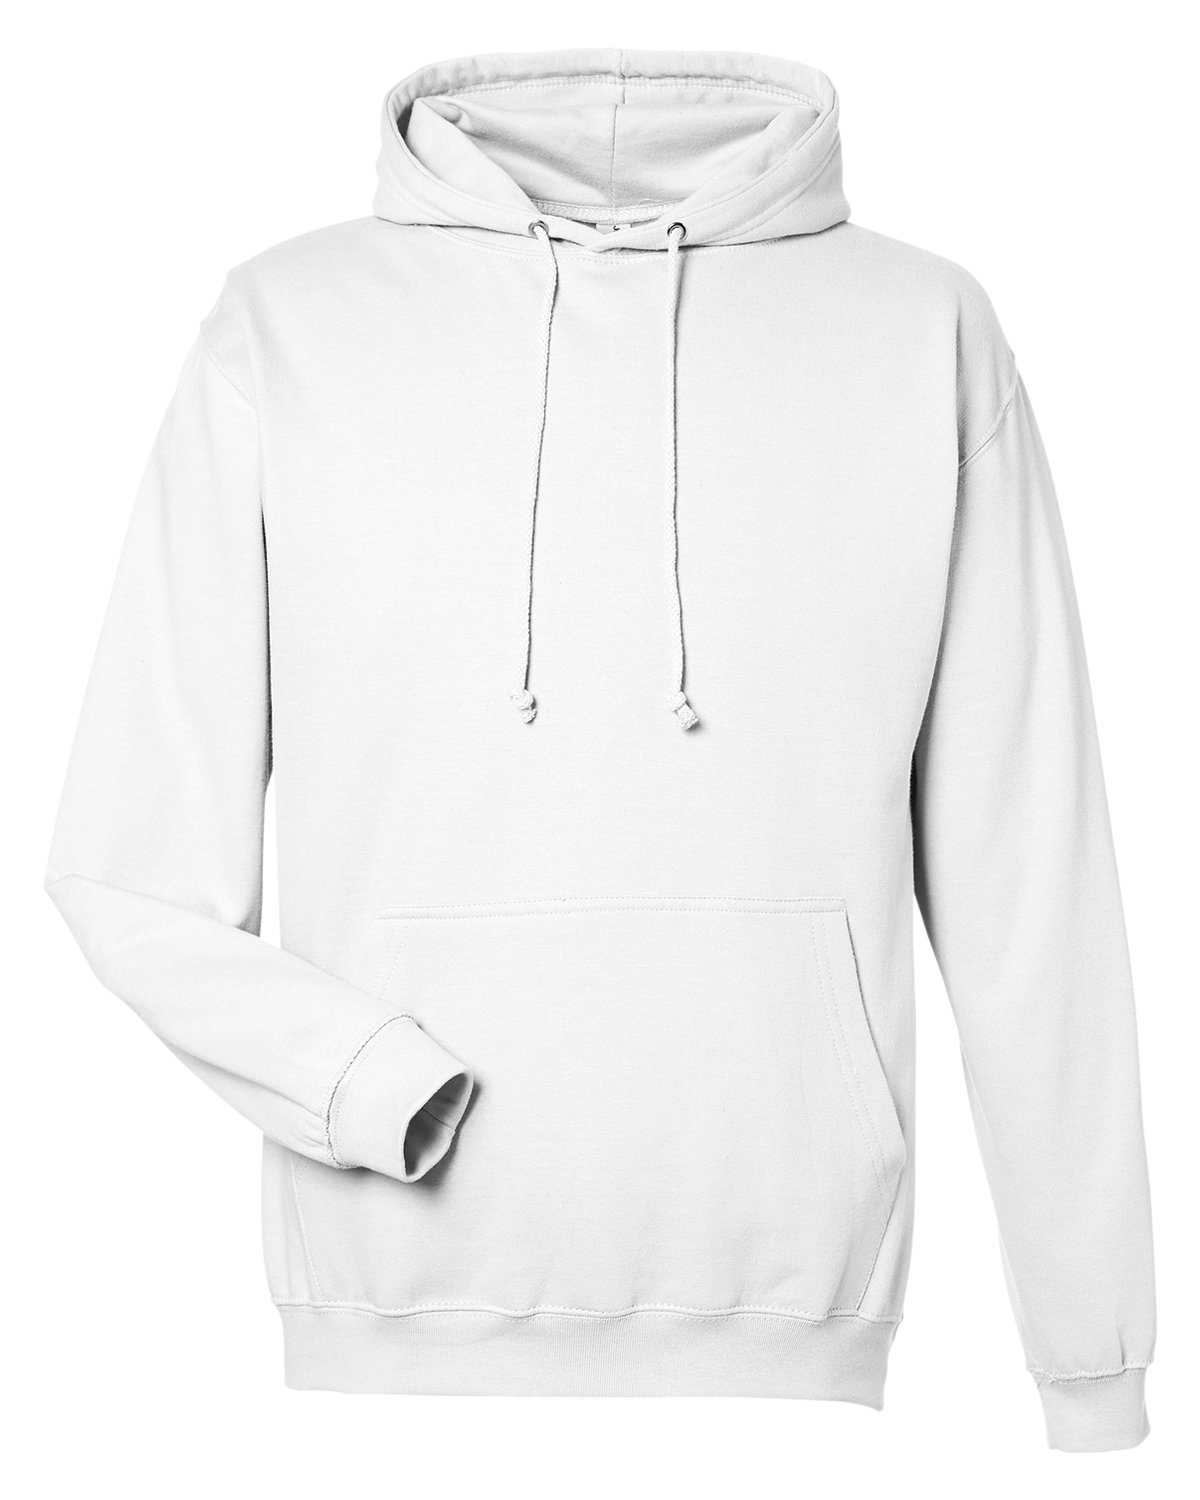 Mens Midweight College Hooded Sweatshirt-Just Hoods By AWDis